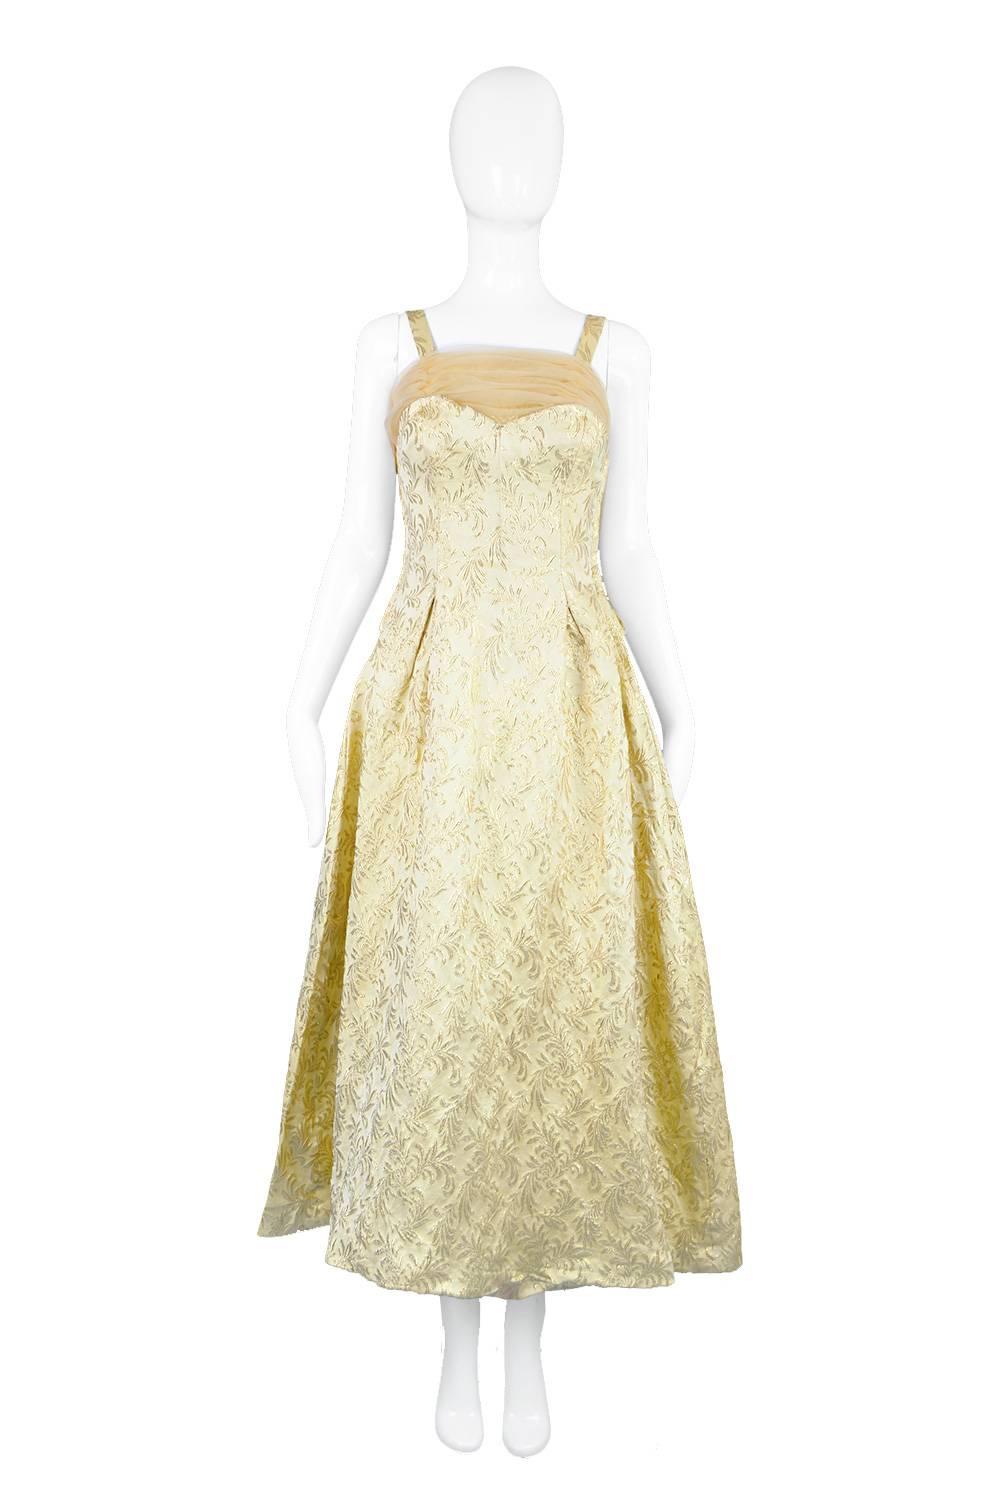 A glamorous vintage evening dress from the 50s with a ruched chiffon shelf bust and matching train to the rear. In a luxurious gold silk and lame brocade by Lee Delman.

Estimated Size: UK 8-10 / US 4-6/ EU 36-38
Bust - 32